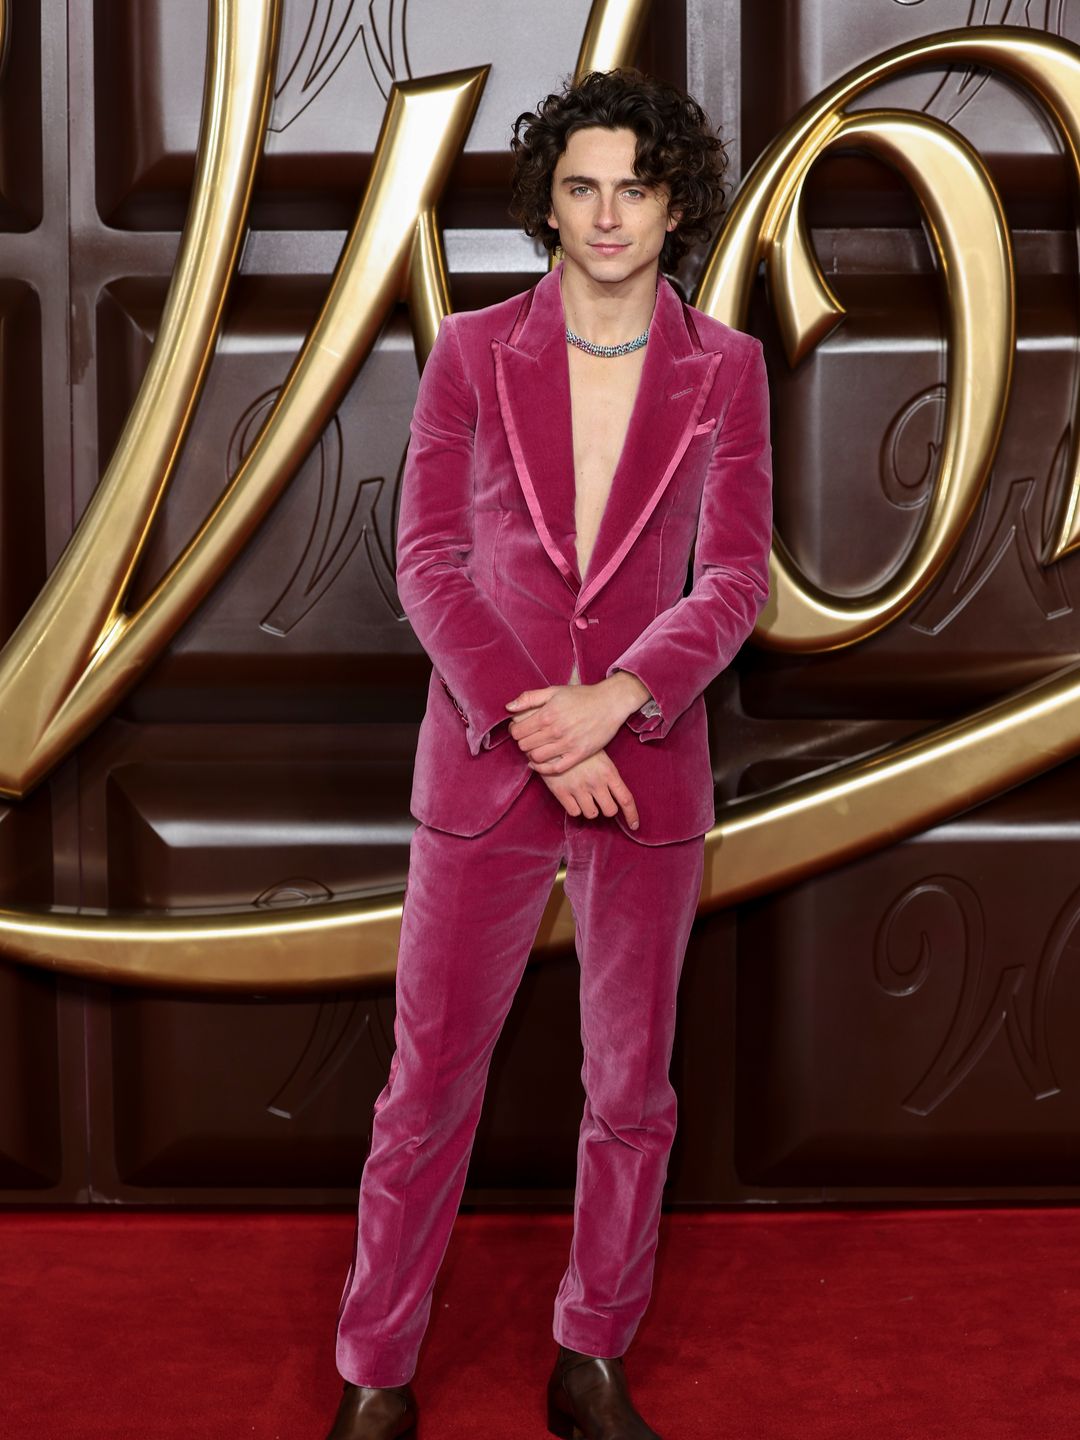 Timothée Chalamet attends the "Wonka" World Premiere at The Royal Festival Hall on November 28, 2023 in London, England. (Photo by Mike Marsland/WireImage)